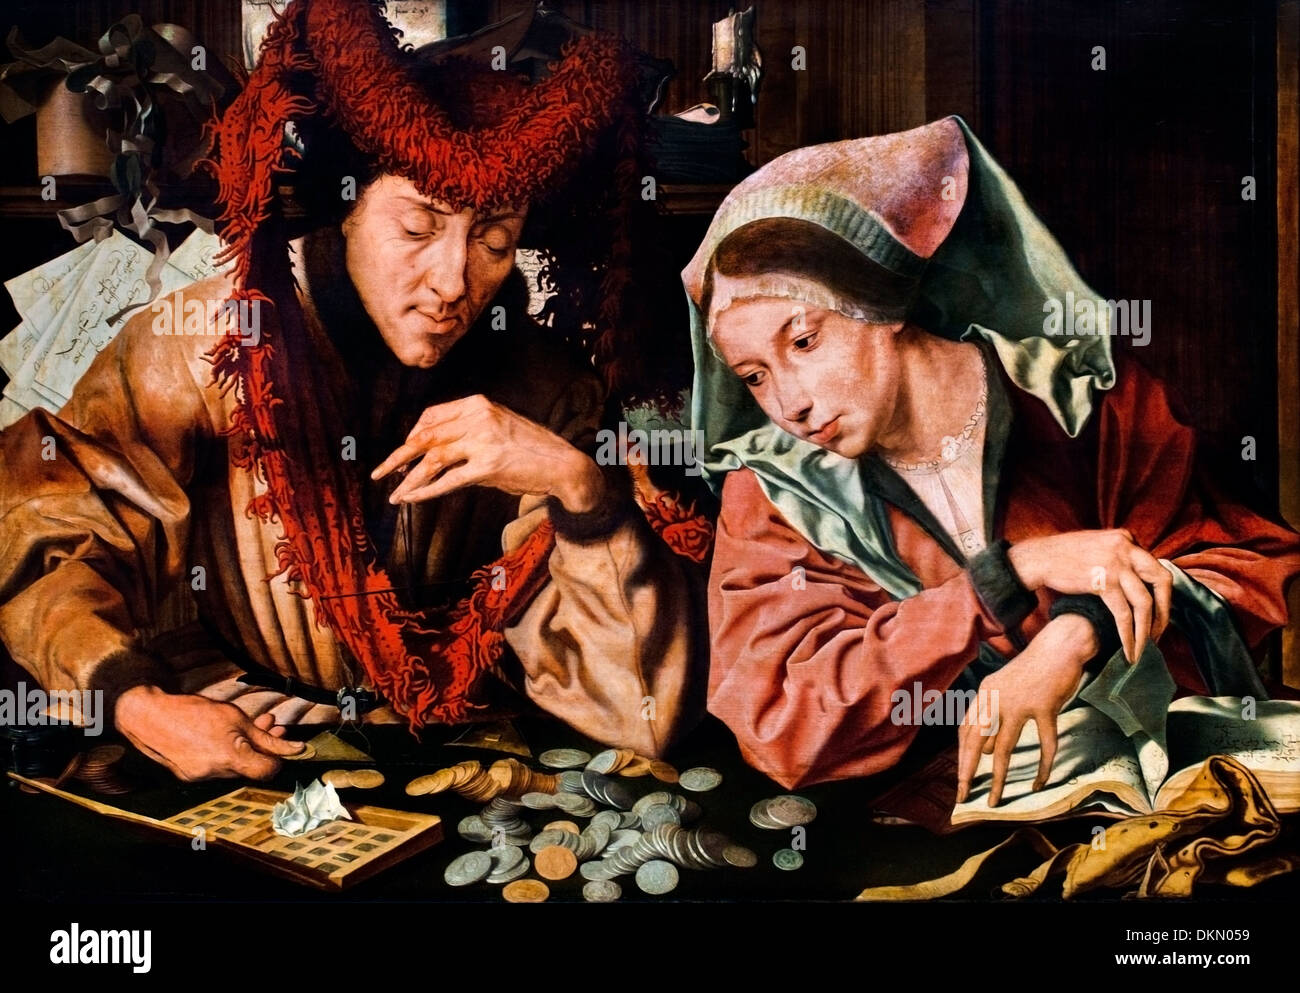 A tax collector with his wife by Marinus van Reymerswale - Reimerswaal 1490 - 1567 Dutch Netherlands Stock Photo